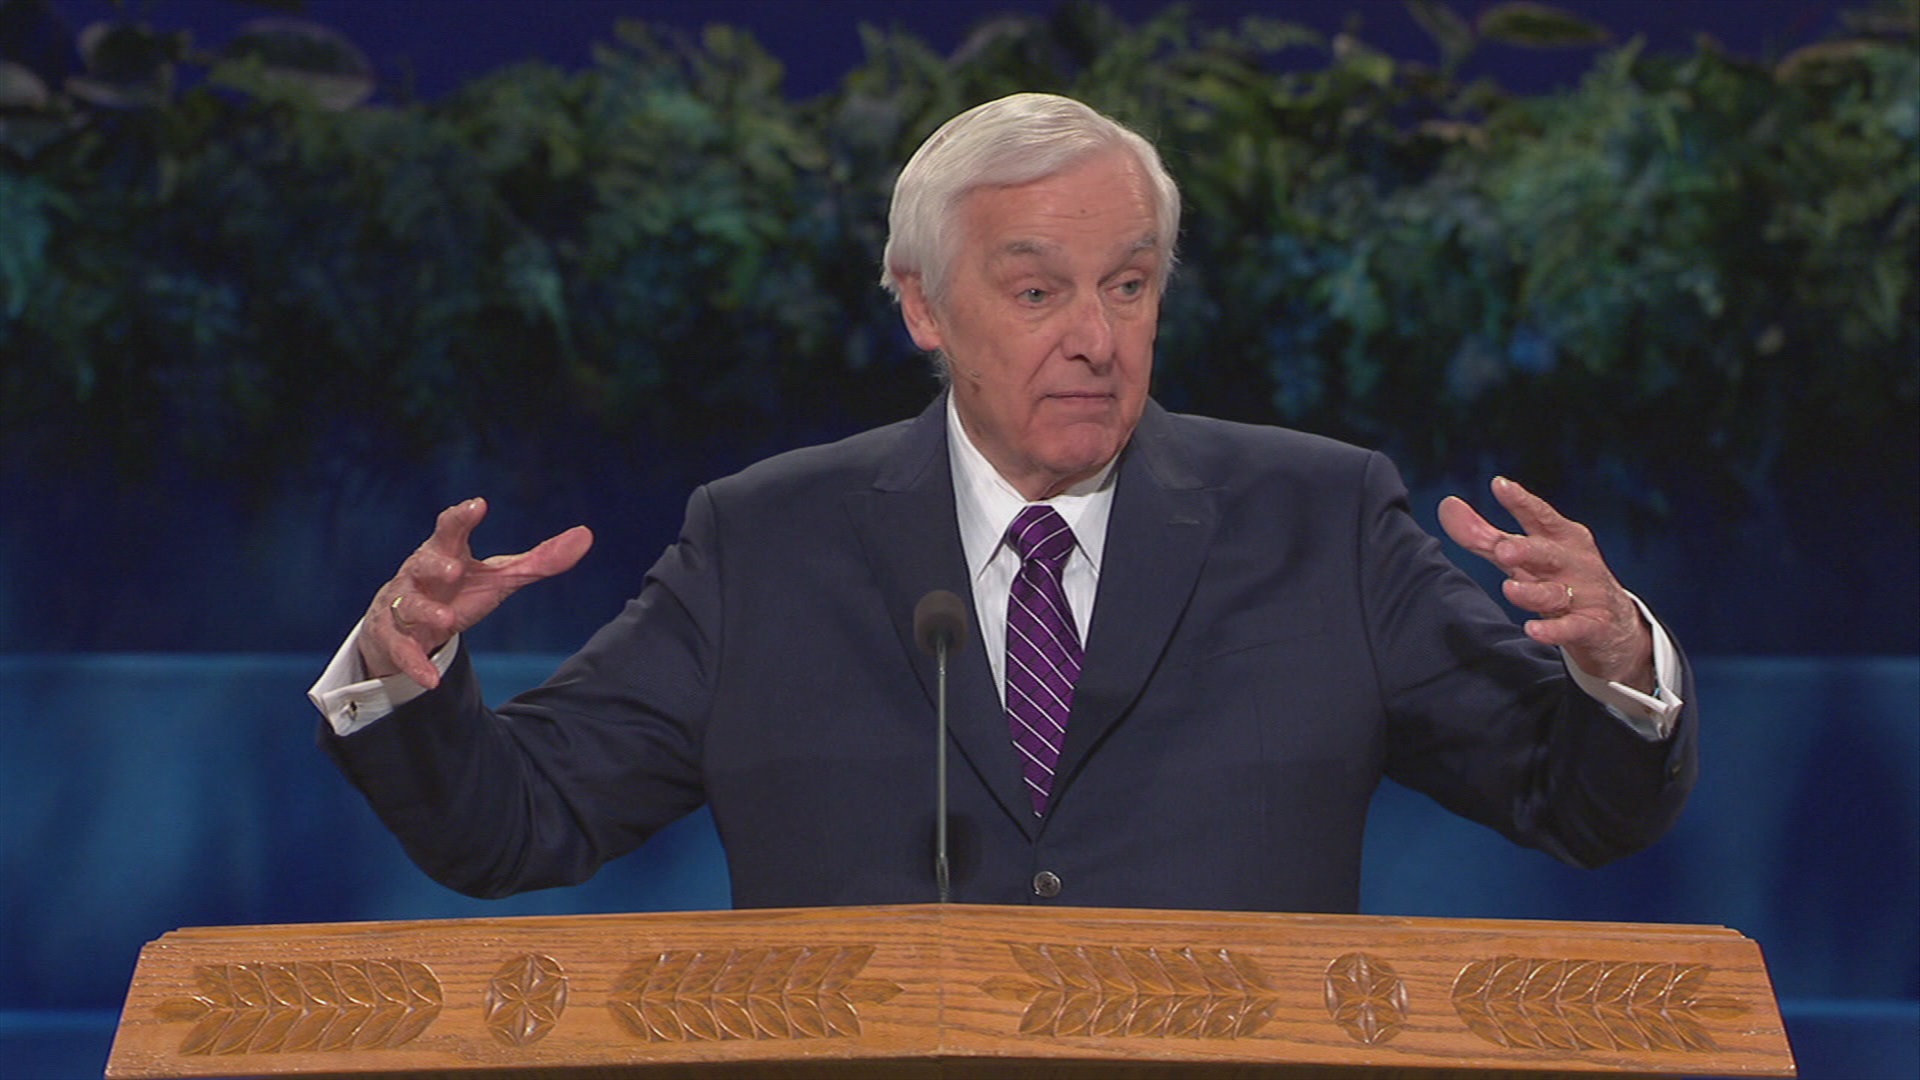 Turning Point with Dr. David Jeremiah TBN